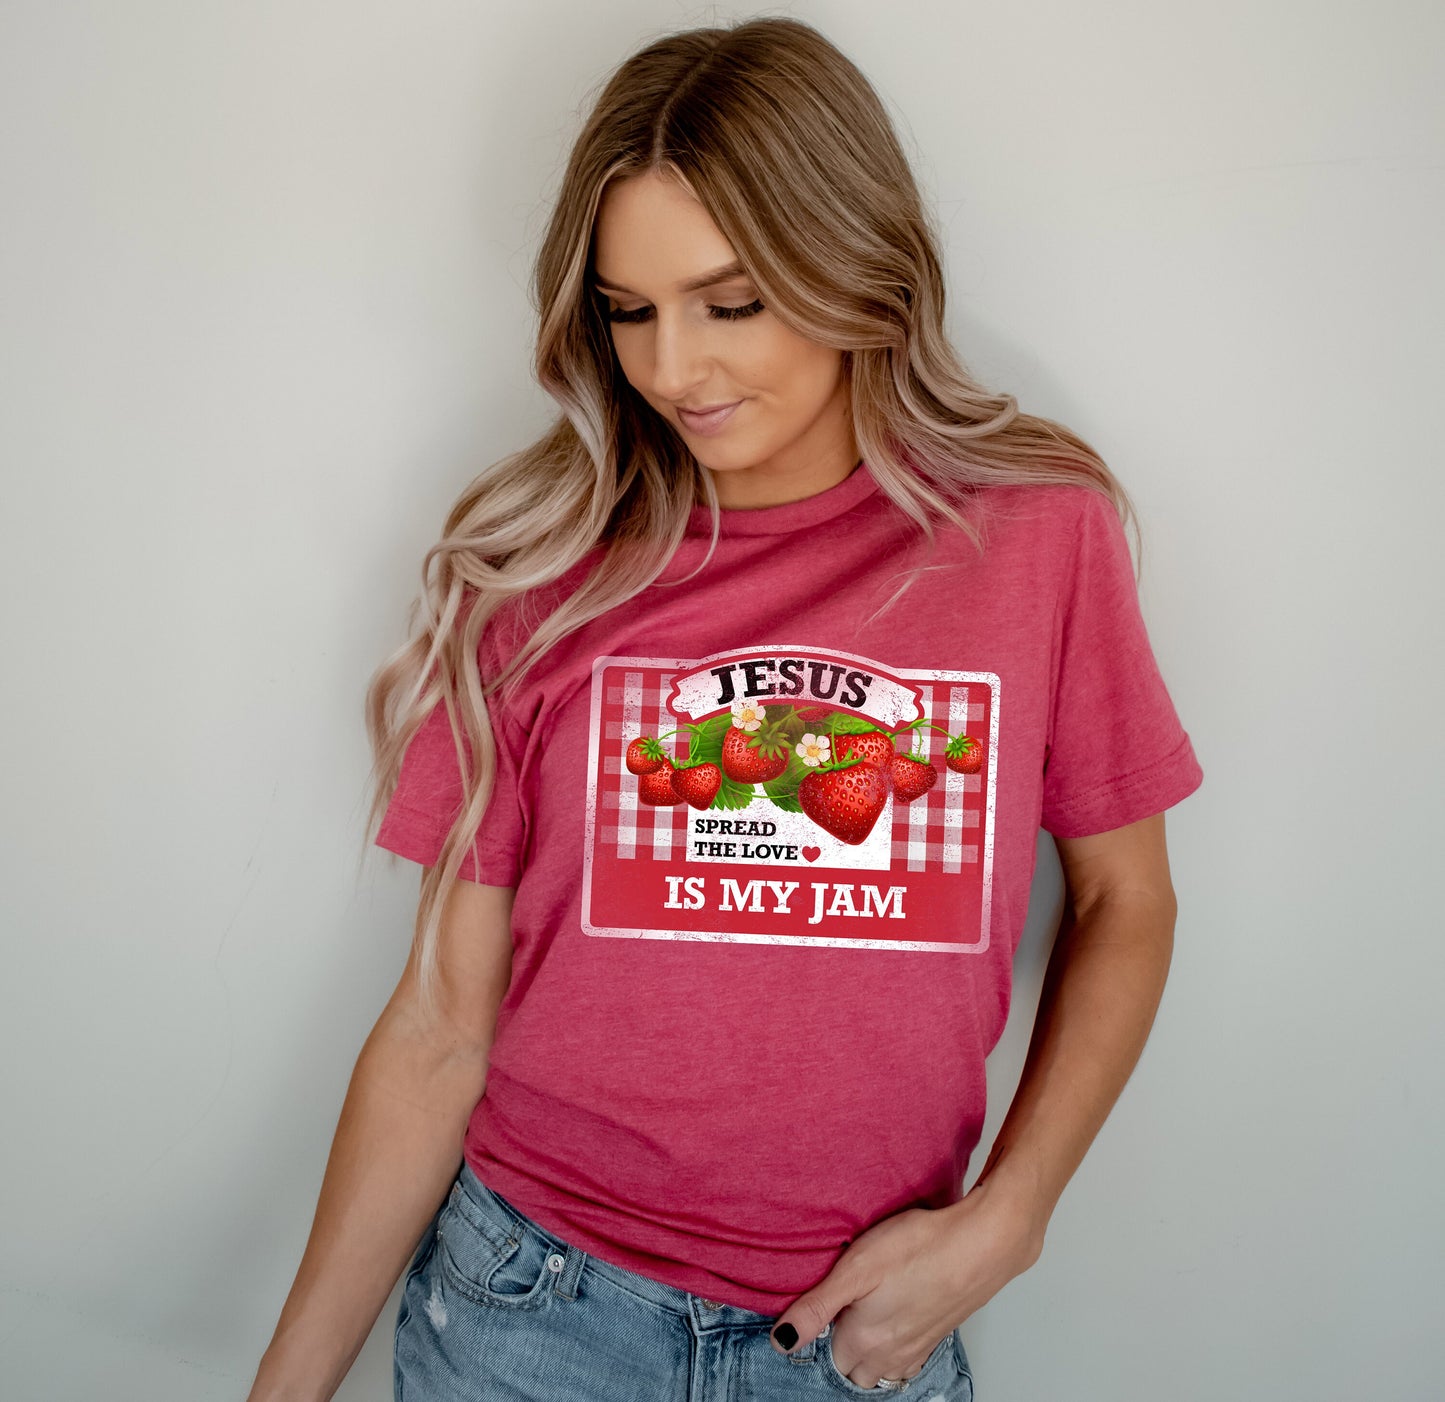 Jesus Is My Jam Christian Condiment Ultra Soft Graphic Tee Unisex Soft Tee T-shirt for Women or Men